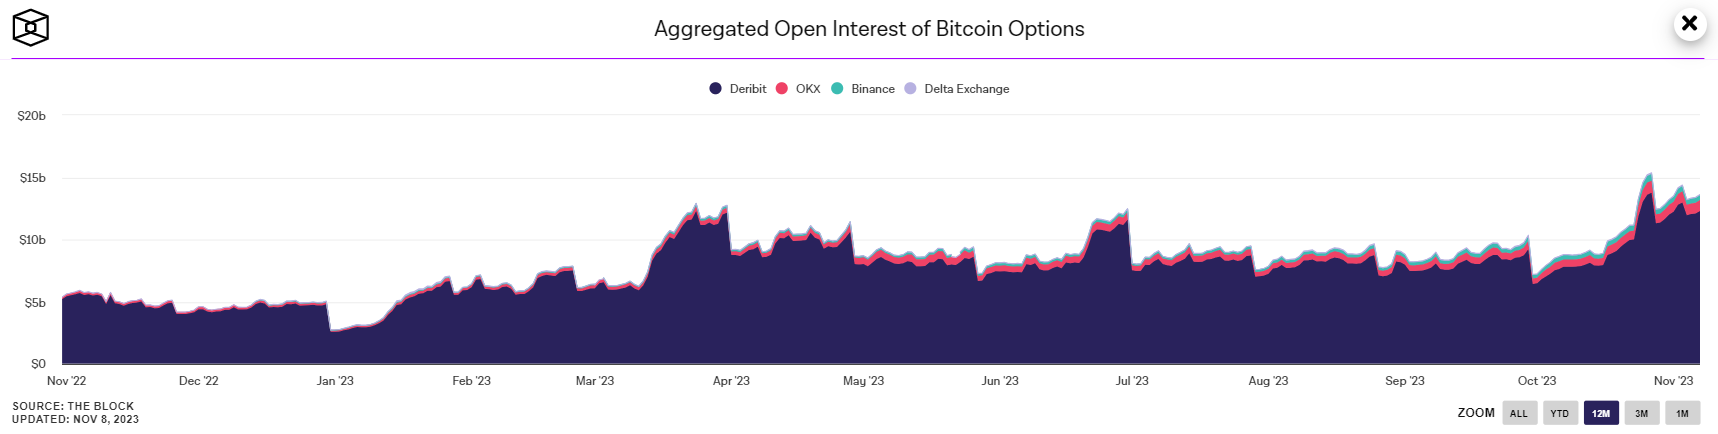 Aggregated Open Interest of Bitcoin Options